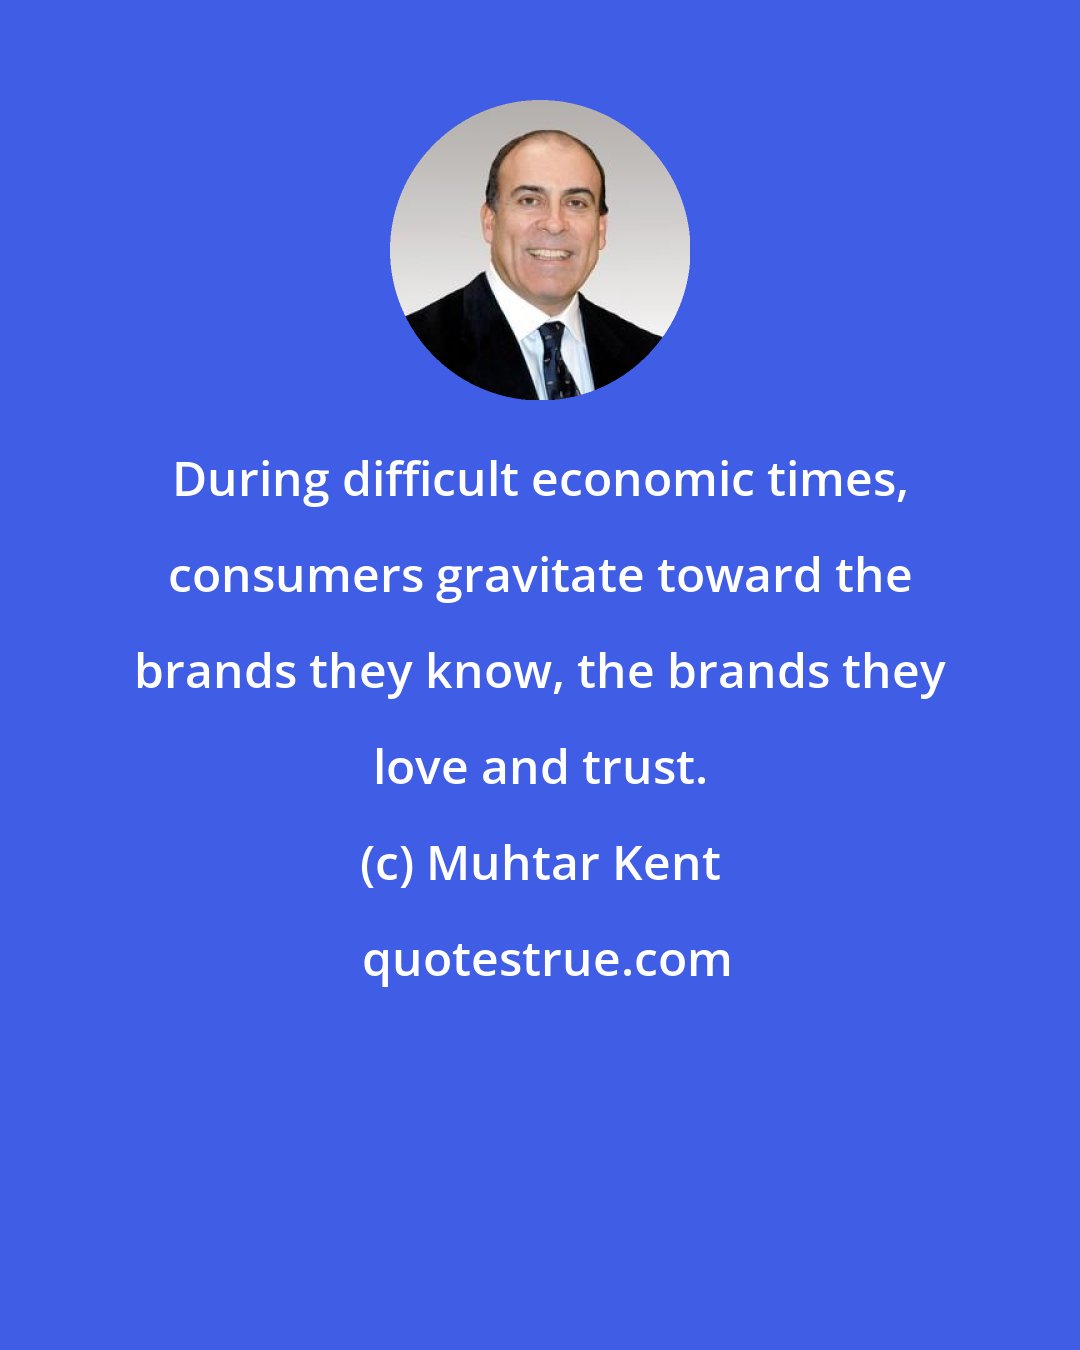 Muhtar Kent: During difficult economic times, consumers gravitate toward the brands they know, the brands they love and trust.